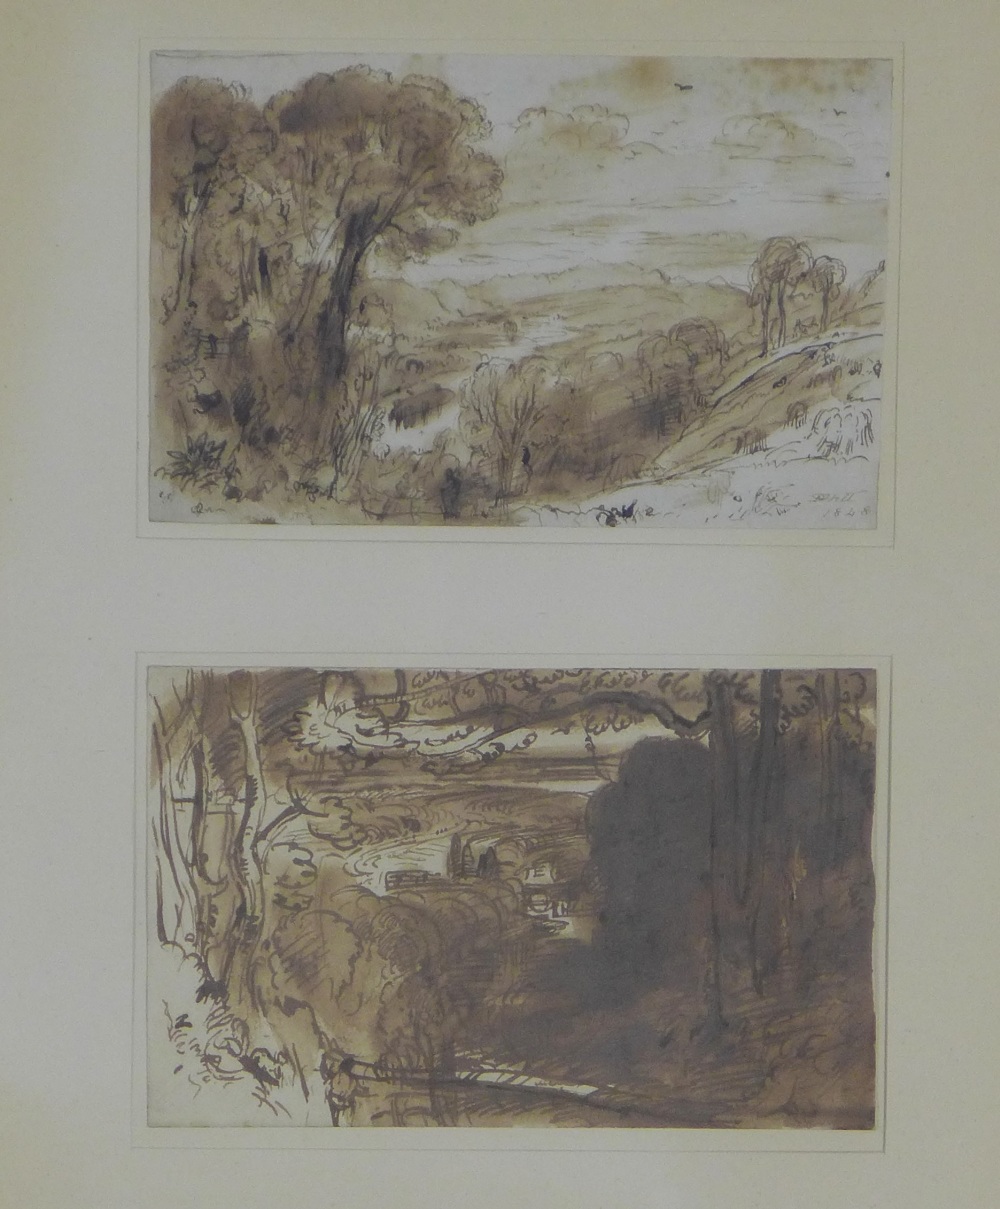 DAVID OCTAVIUS HILL, RSA (British, 1802-1870) Two untitled river scene ink and wash sketches, one